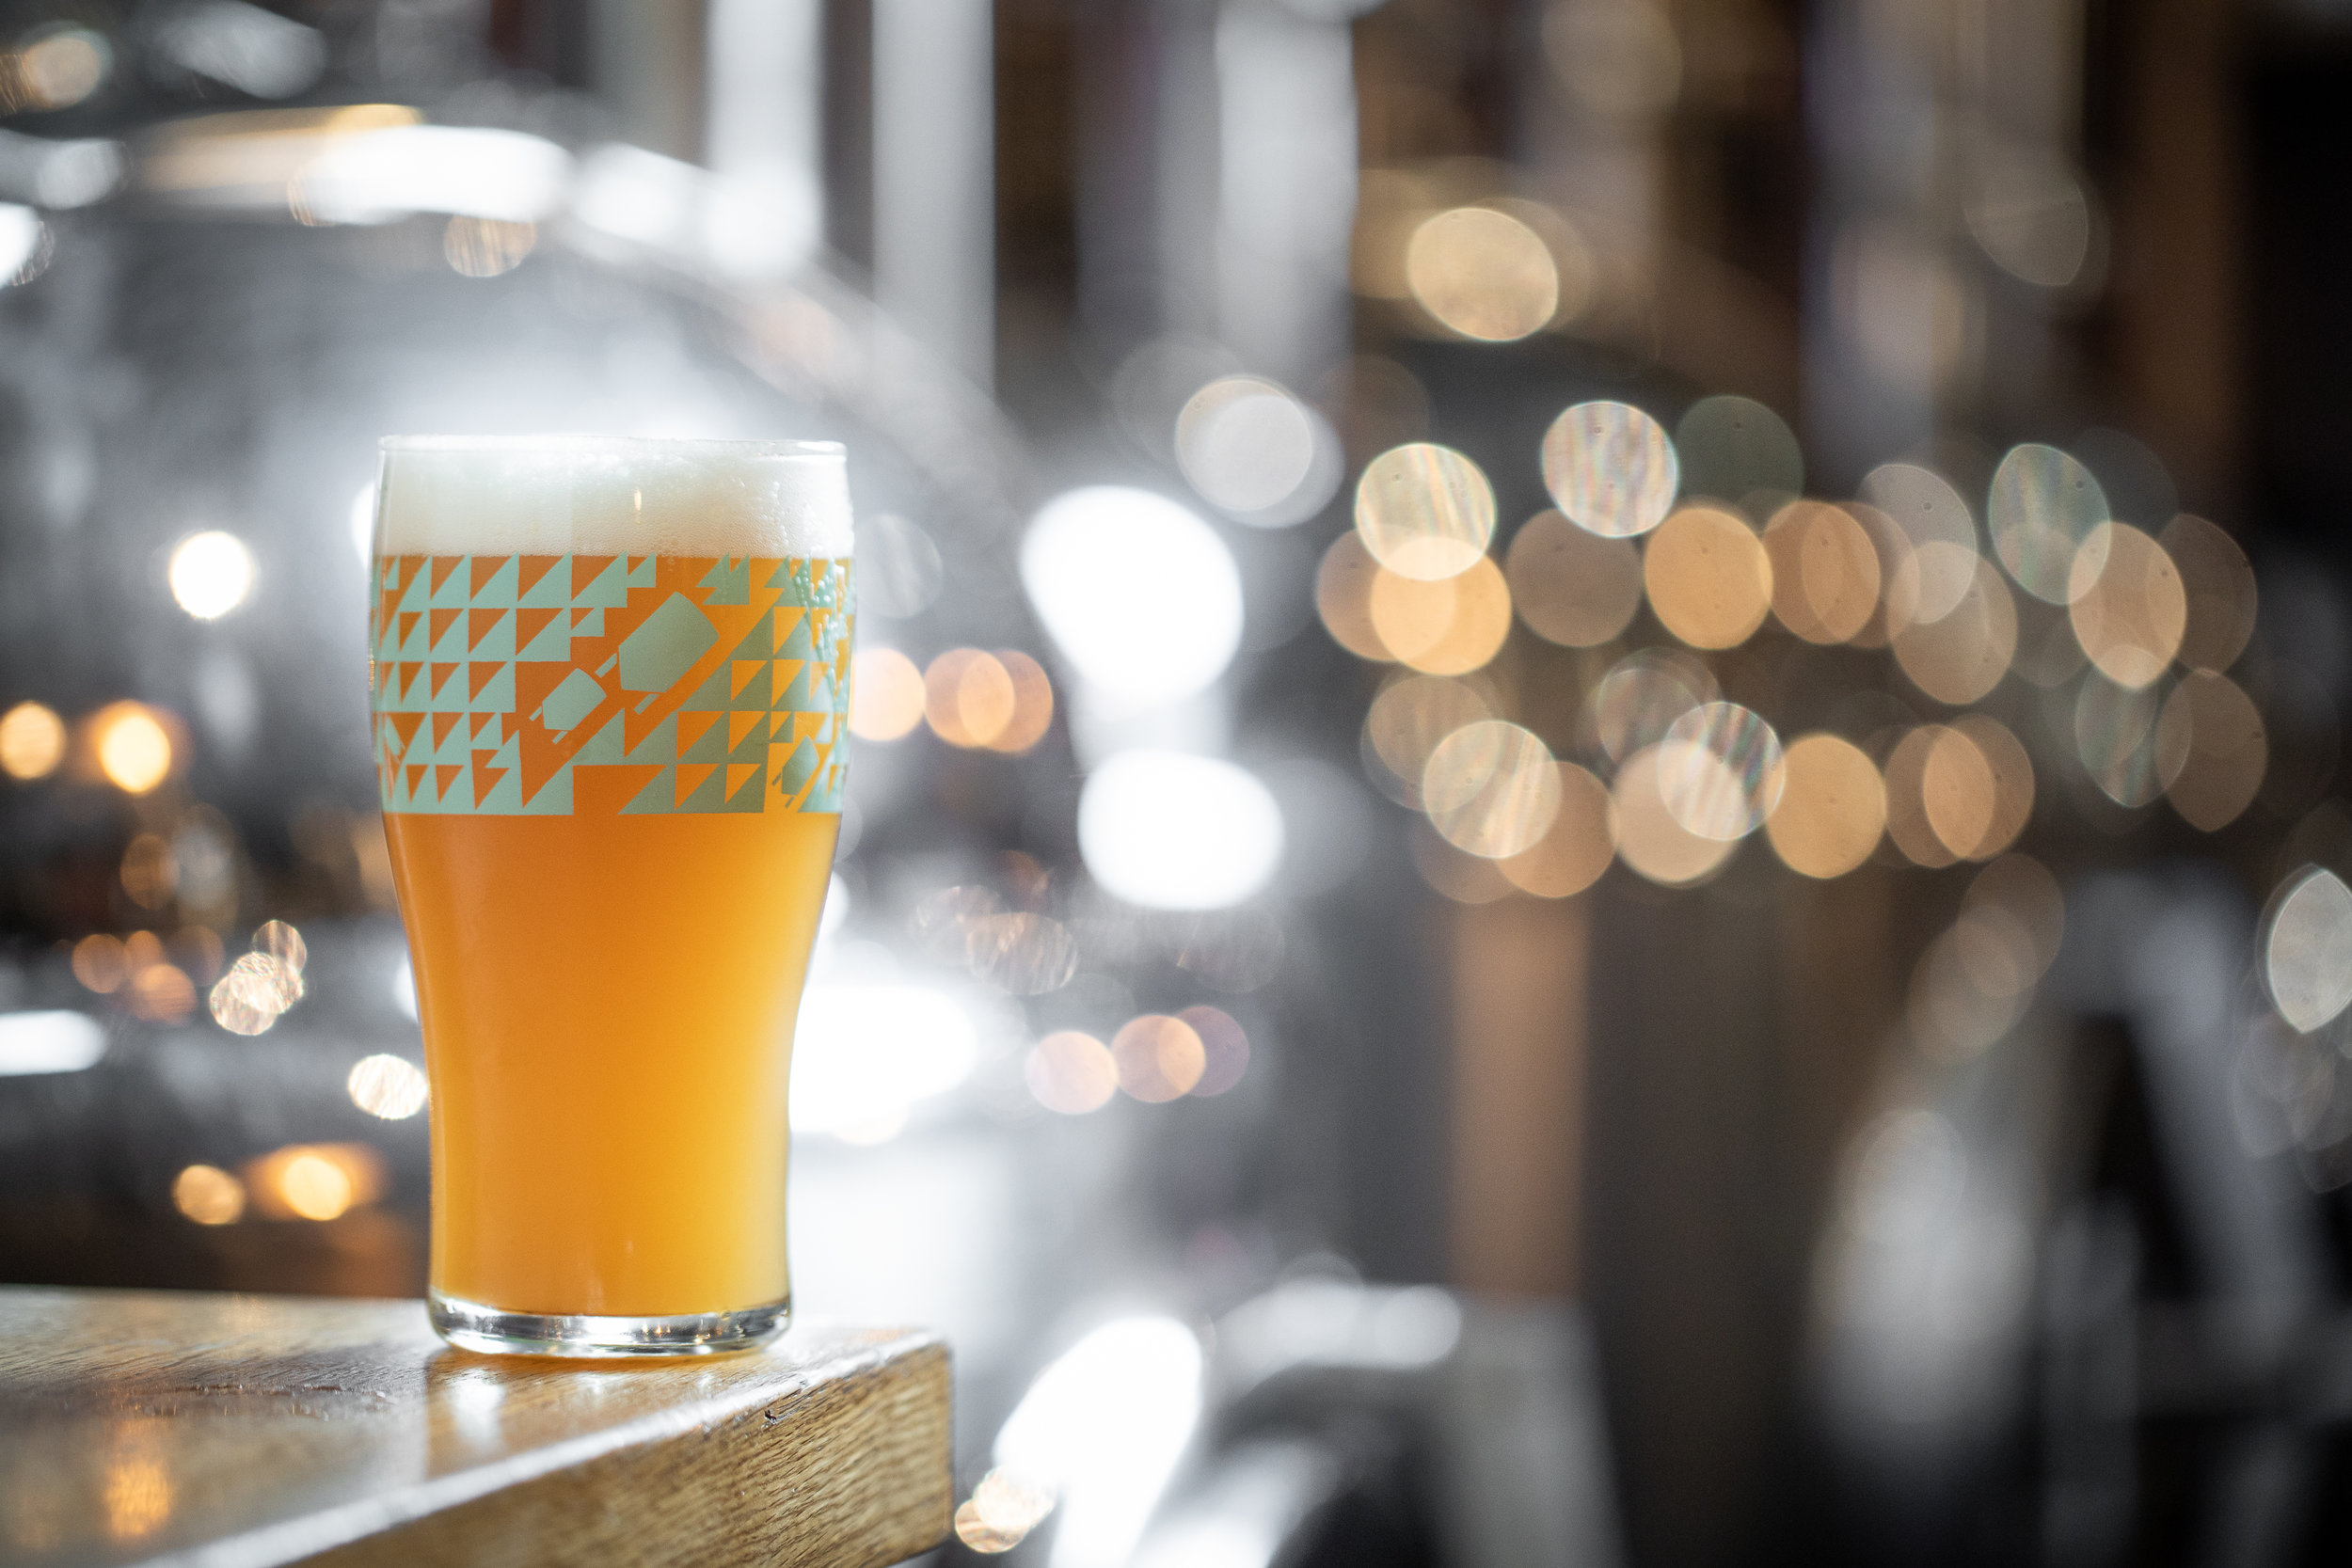 Why we love a pint: The taste of beer alone releases the 'feel